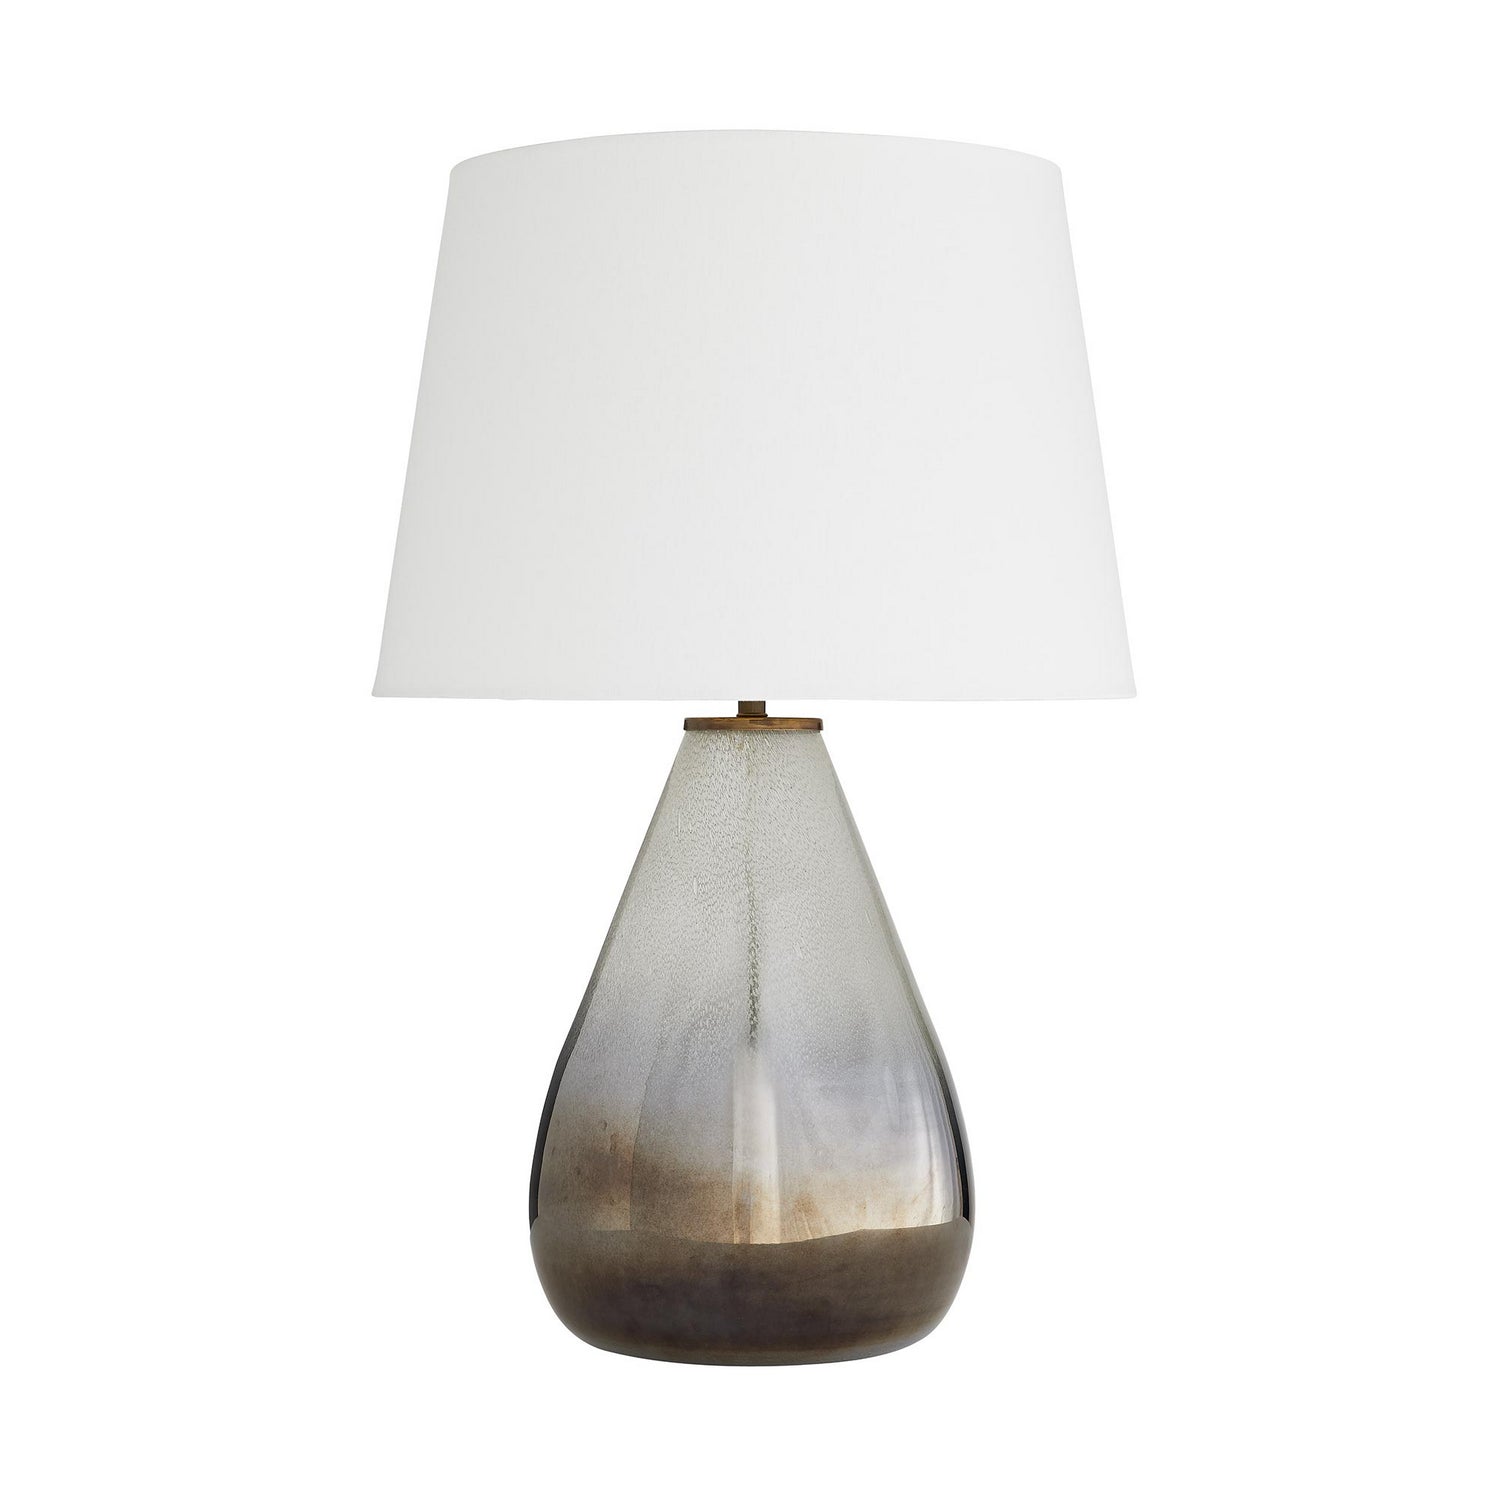 One Light Table Lamp from the Tiber collection in Seedy &amp, Smoke Luster Ombre finish